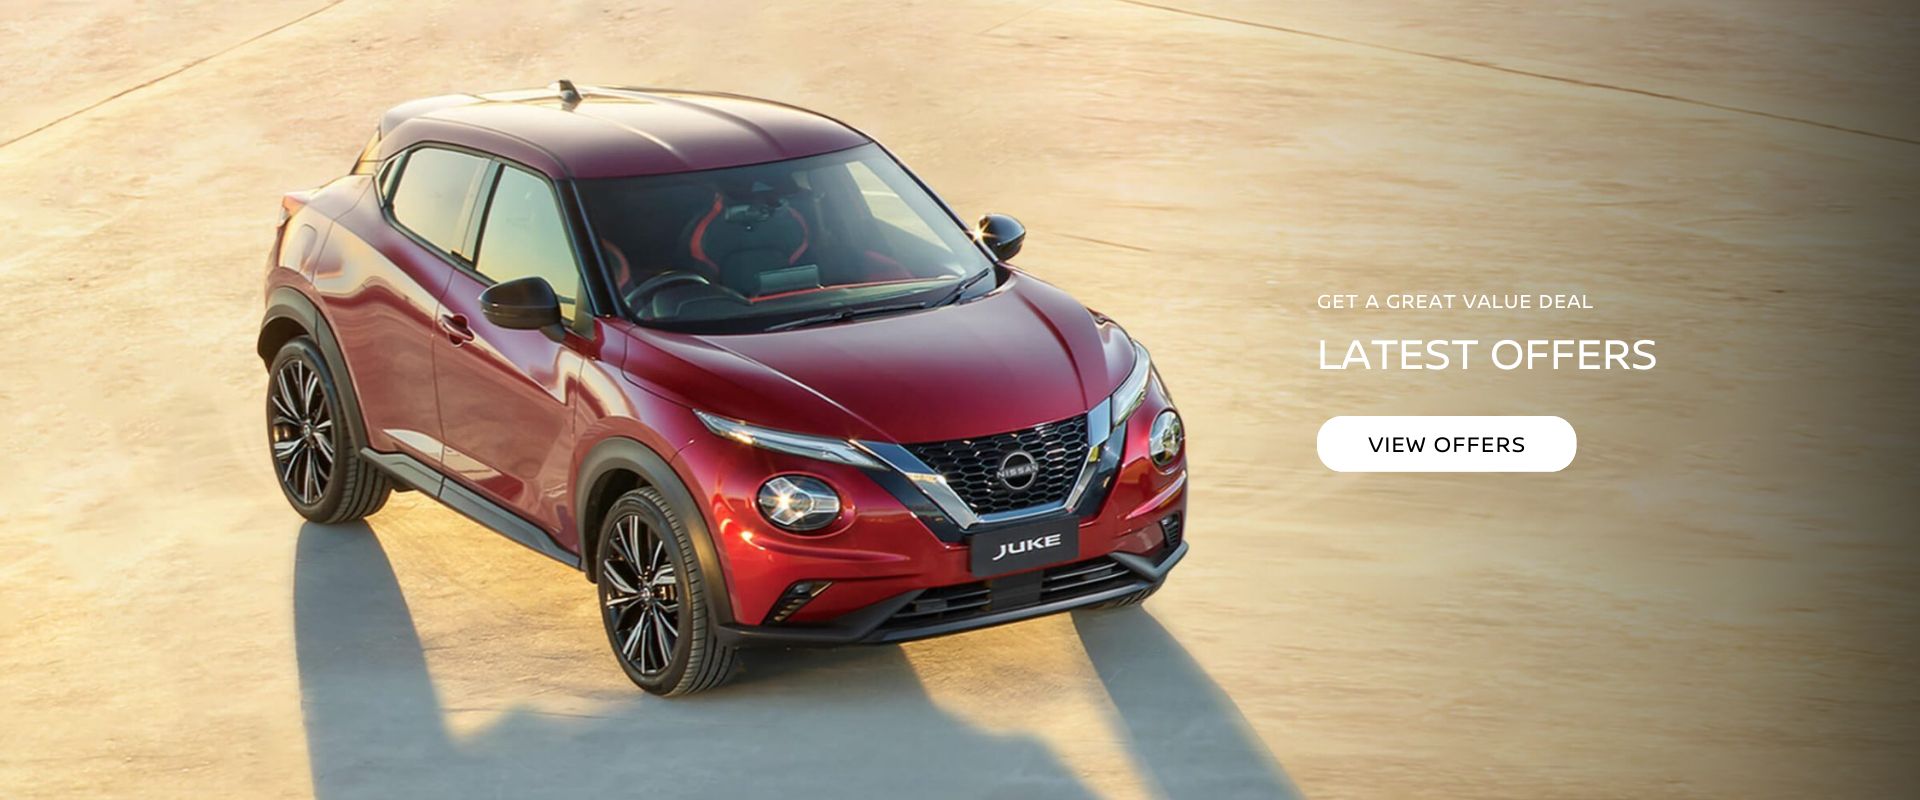 Get a great value deal - Latest Nissan Offers